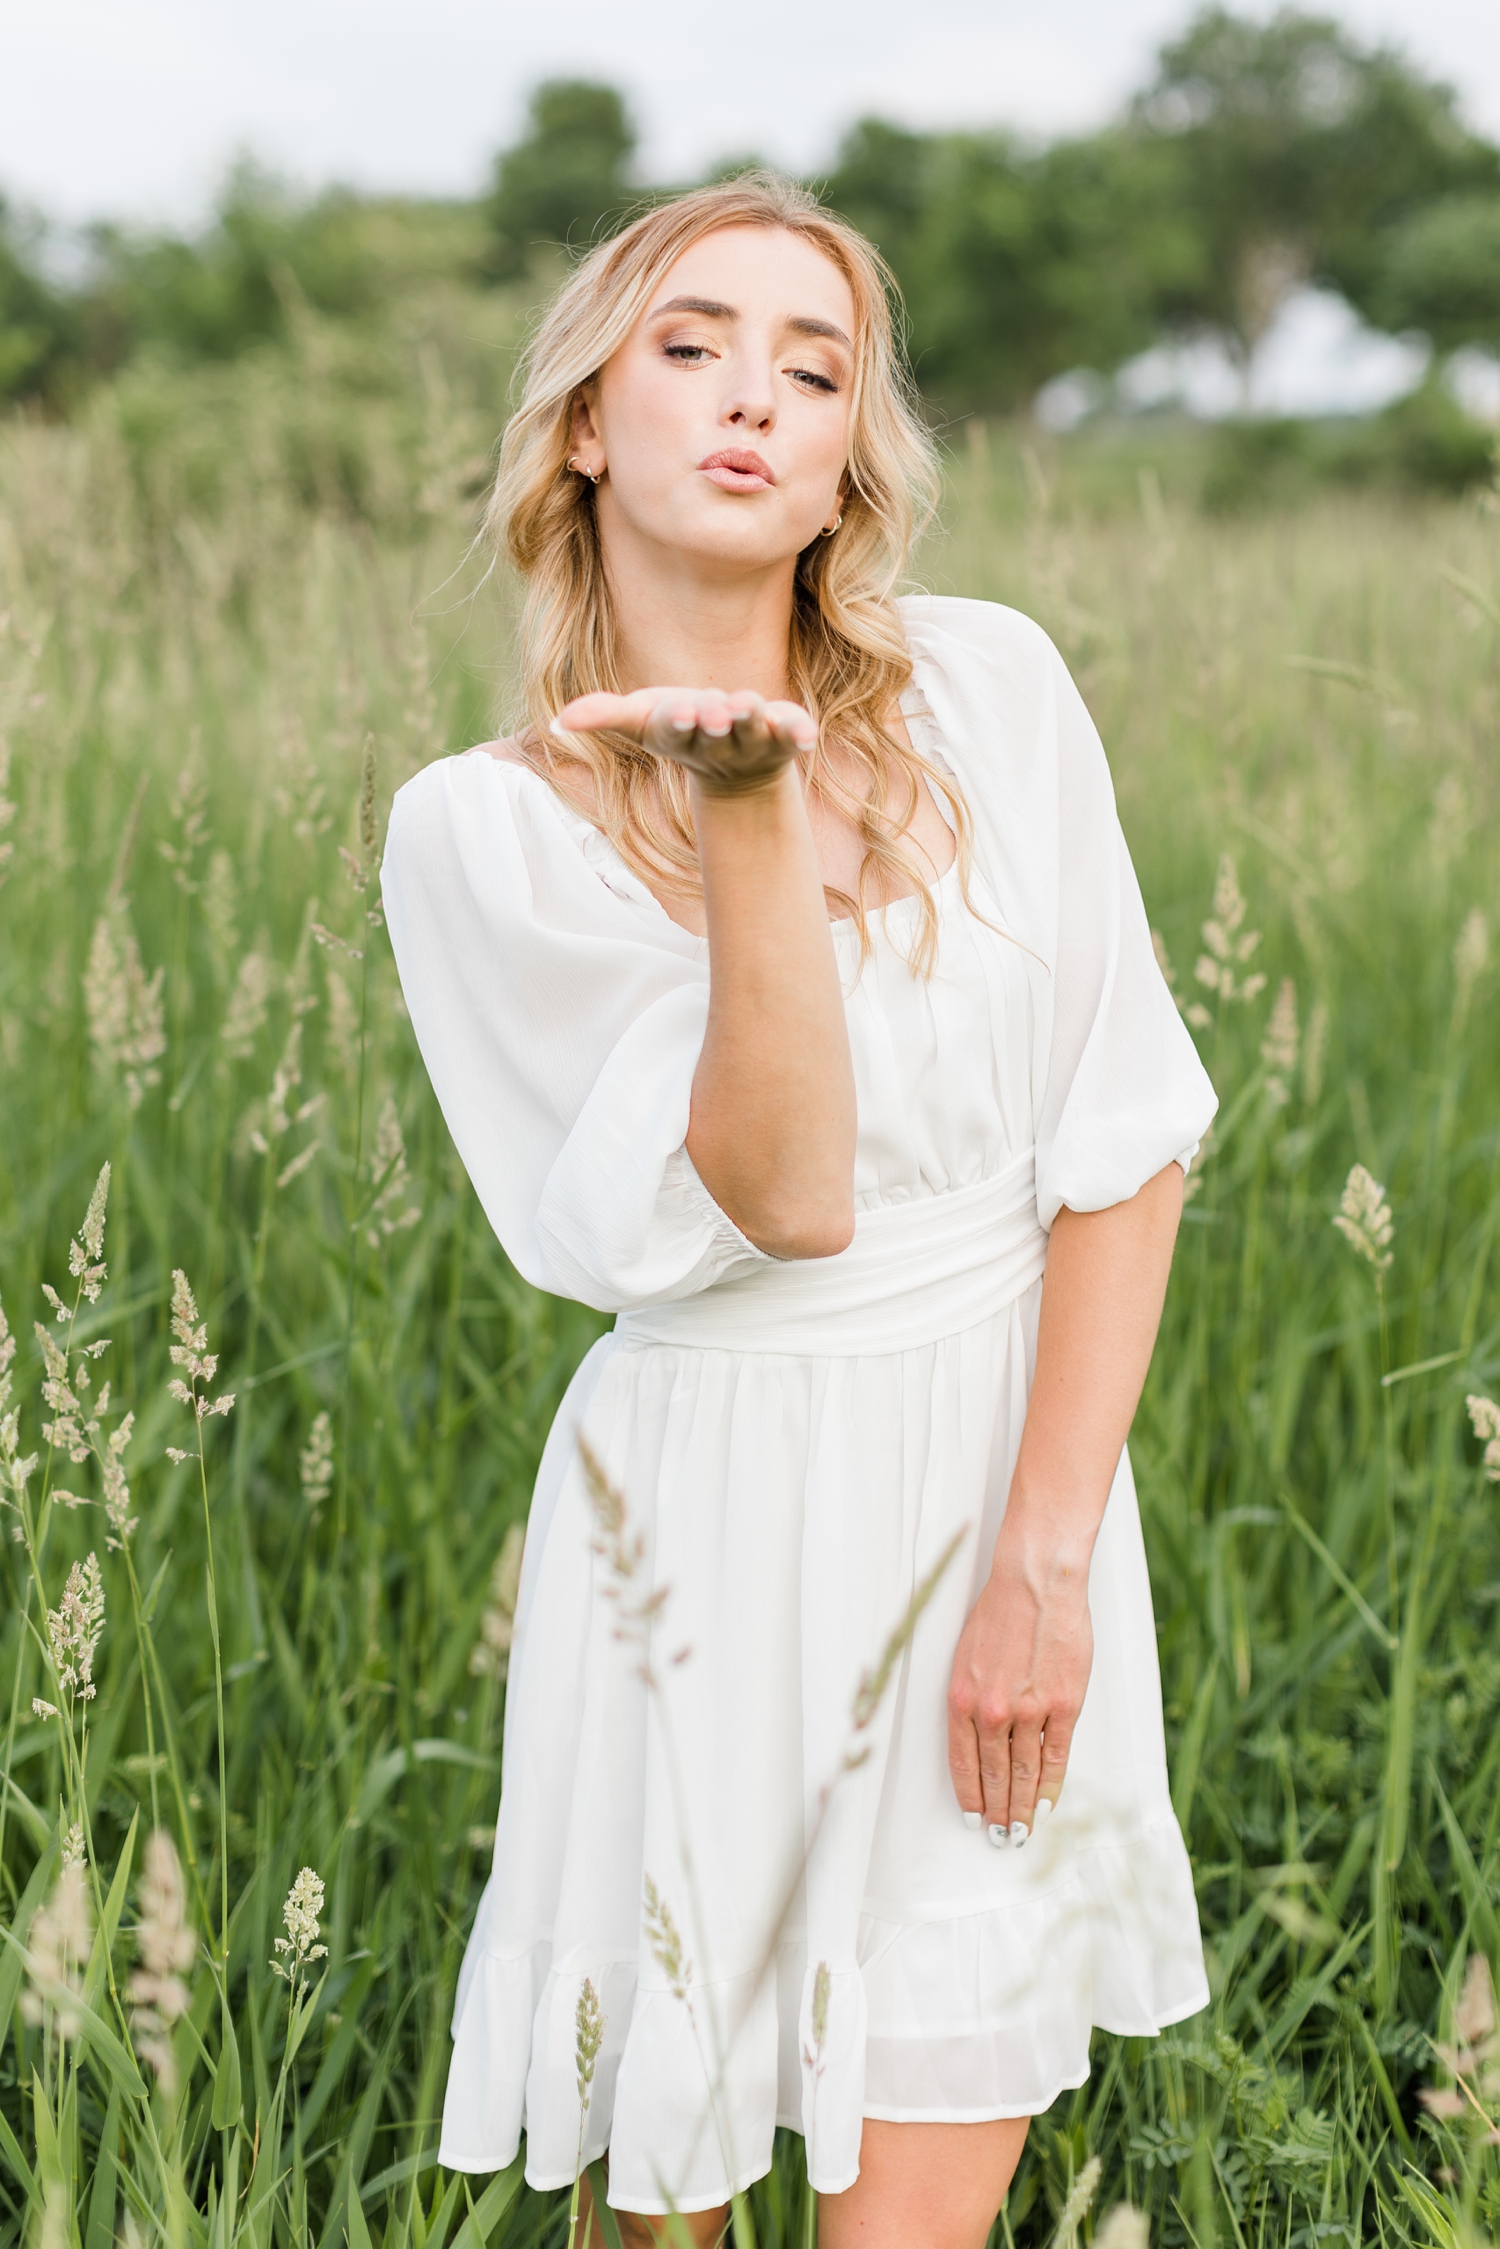 Raegan wearing a white dress blows a kiss as she stands in a tall grassy field | CB Studio